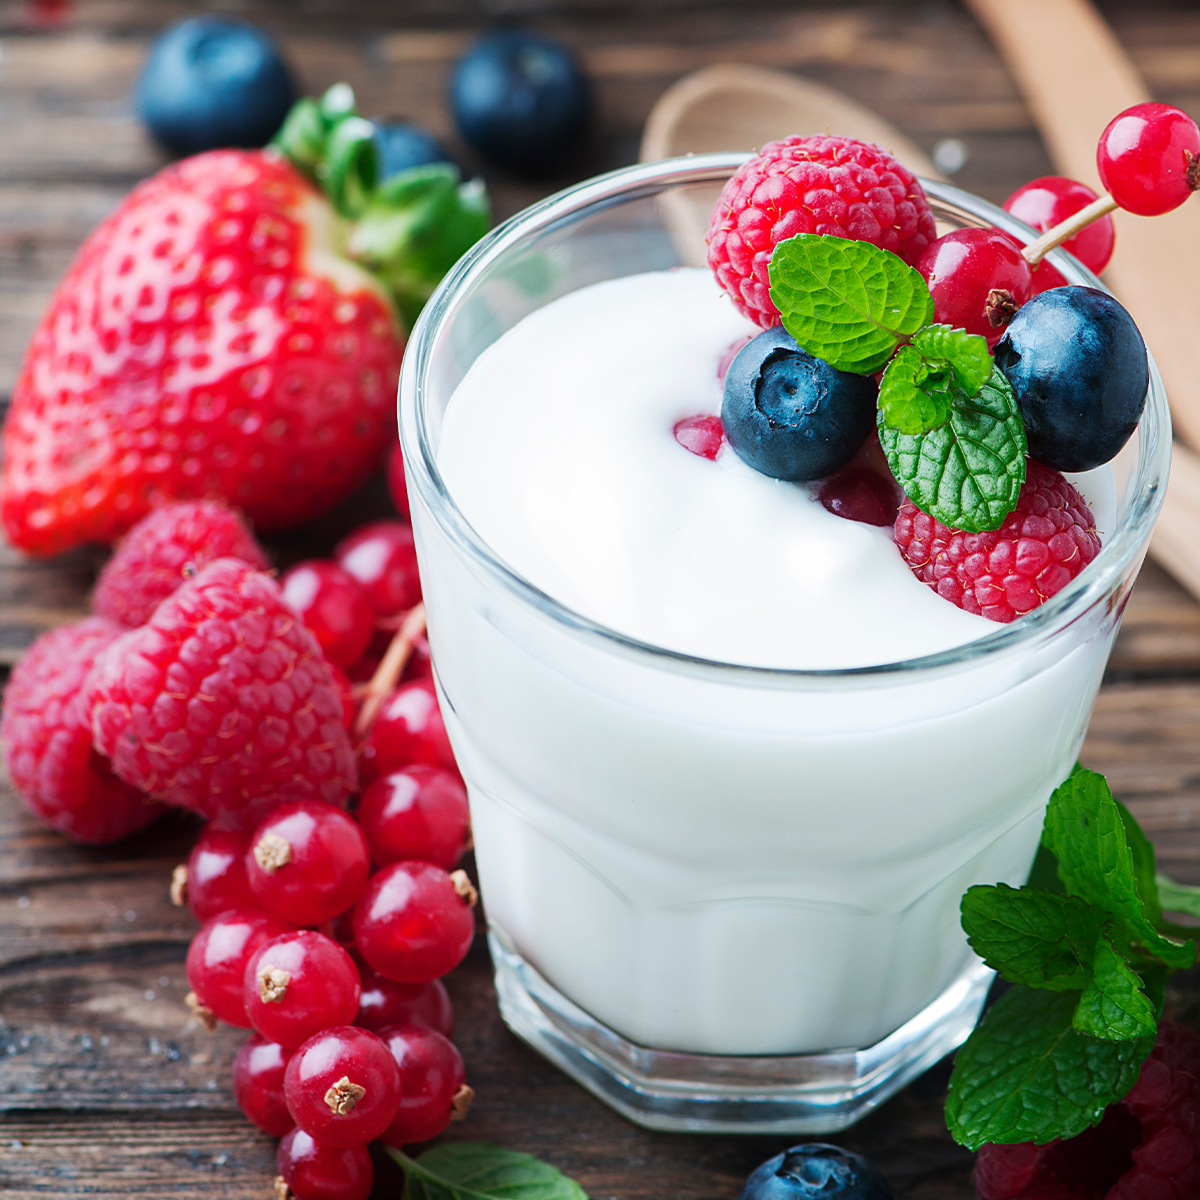 Glass of milk with berries